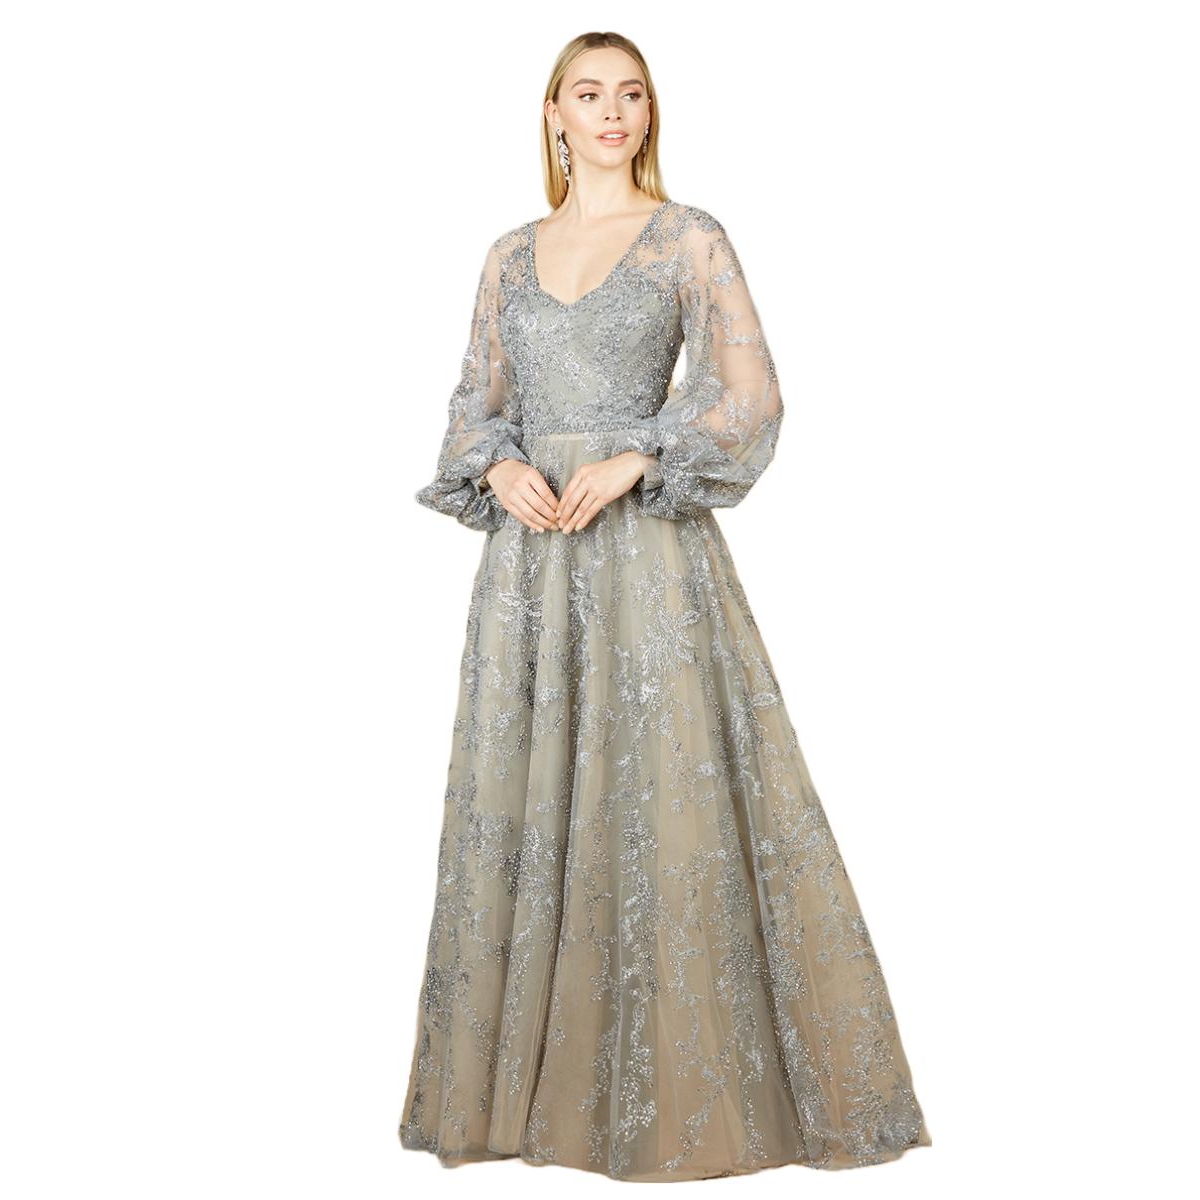 1940s Evening, Prom, Party, Formal, Ball Gowns Lara Womens V Neckline Balloon Sleeve Gown - Slate $598.00 AT vintagedancer.com